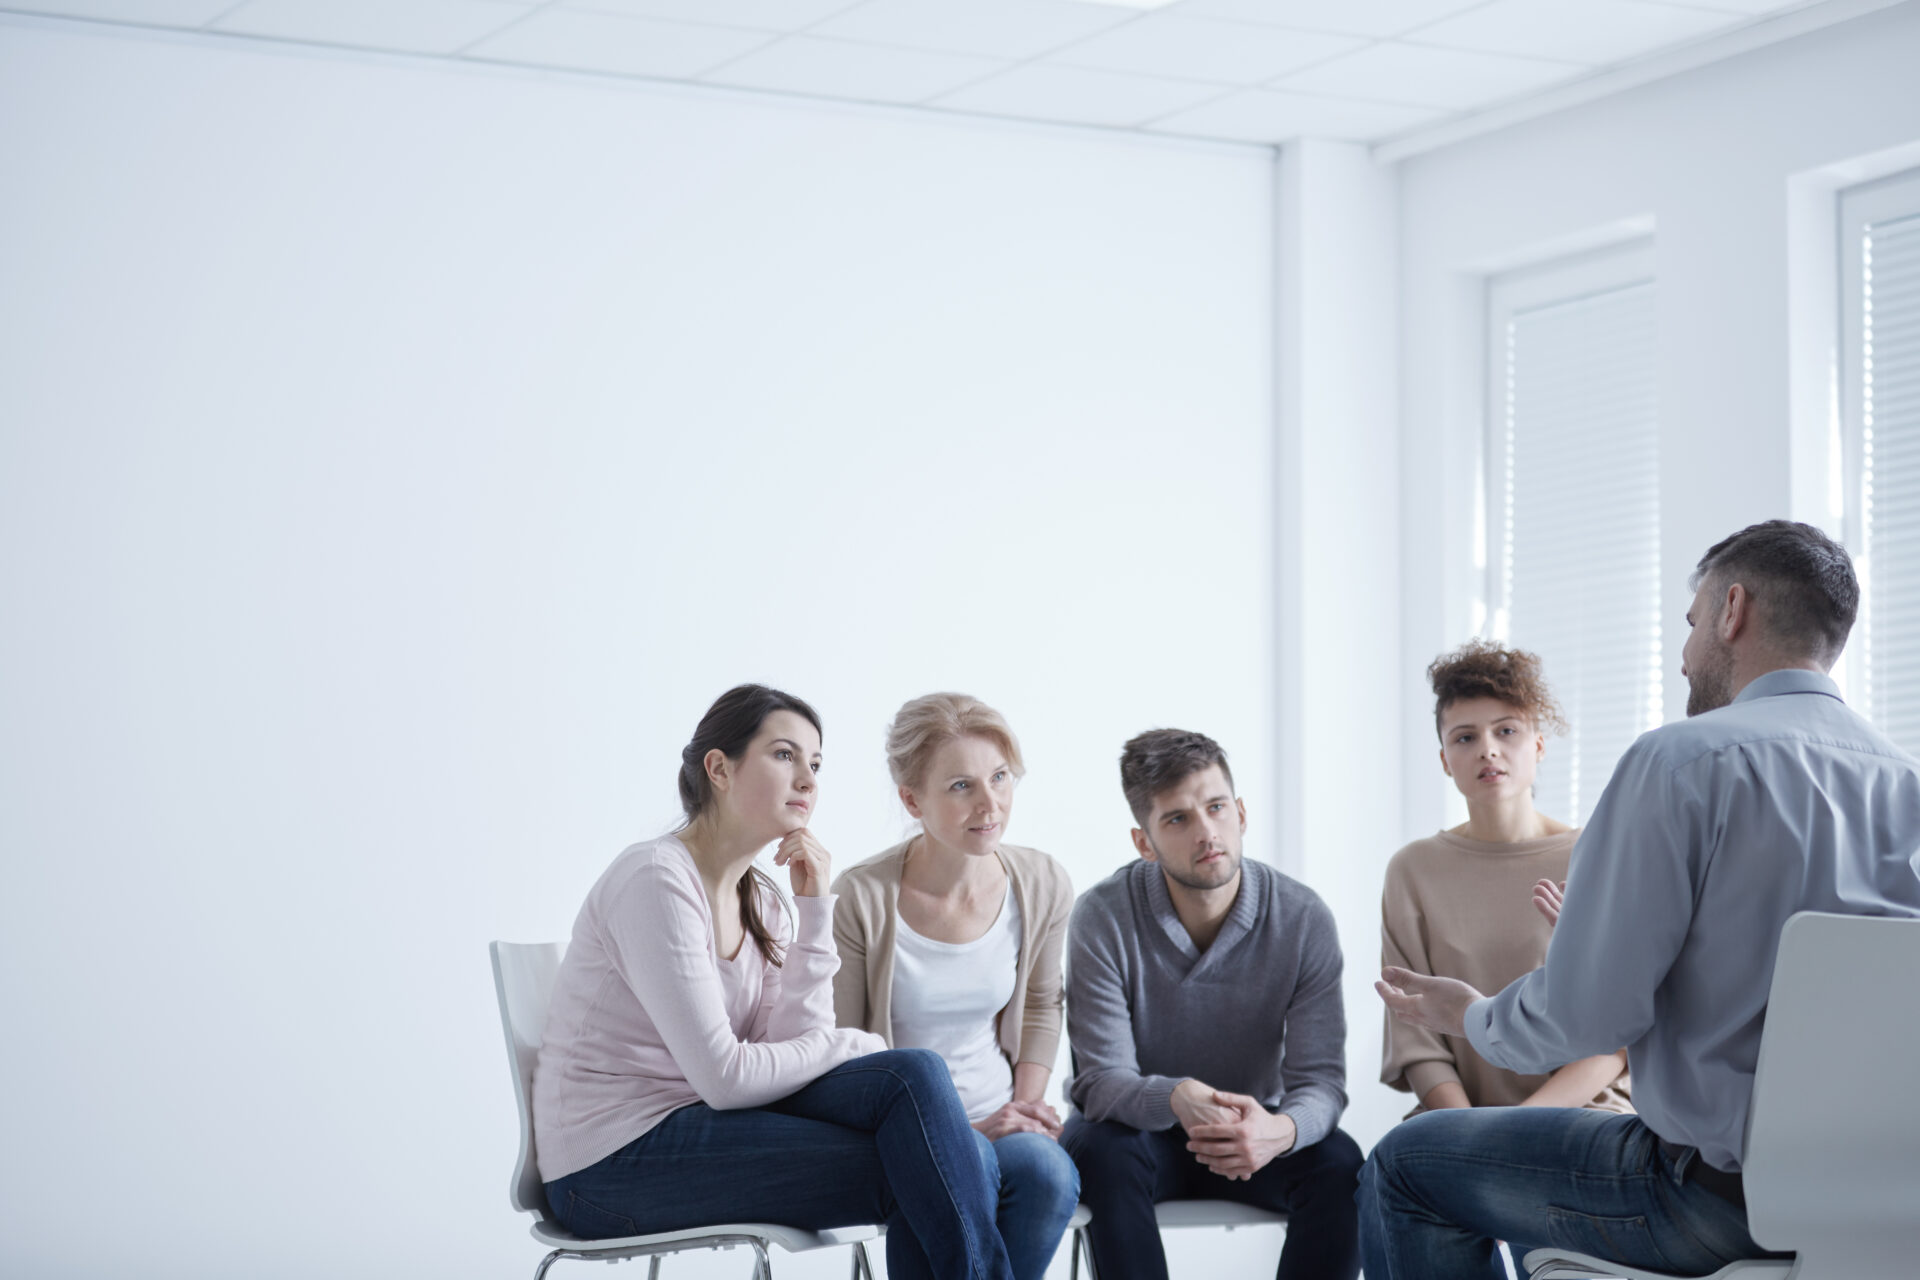 Find Support Groups For Addiction in South Florida